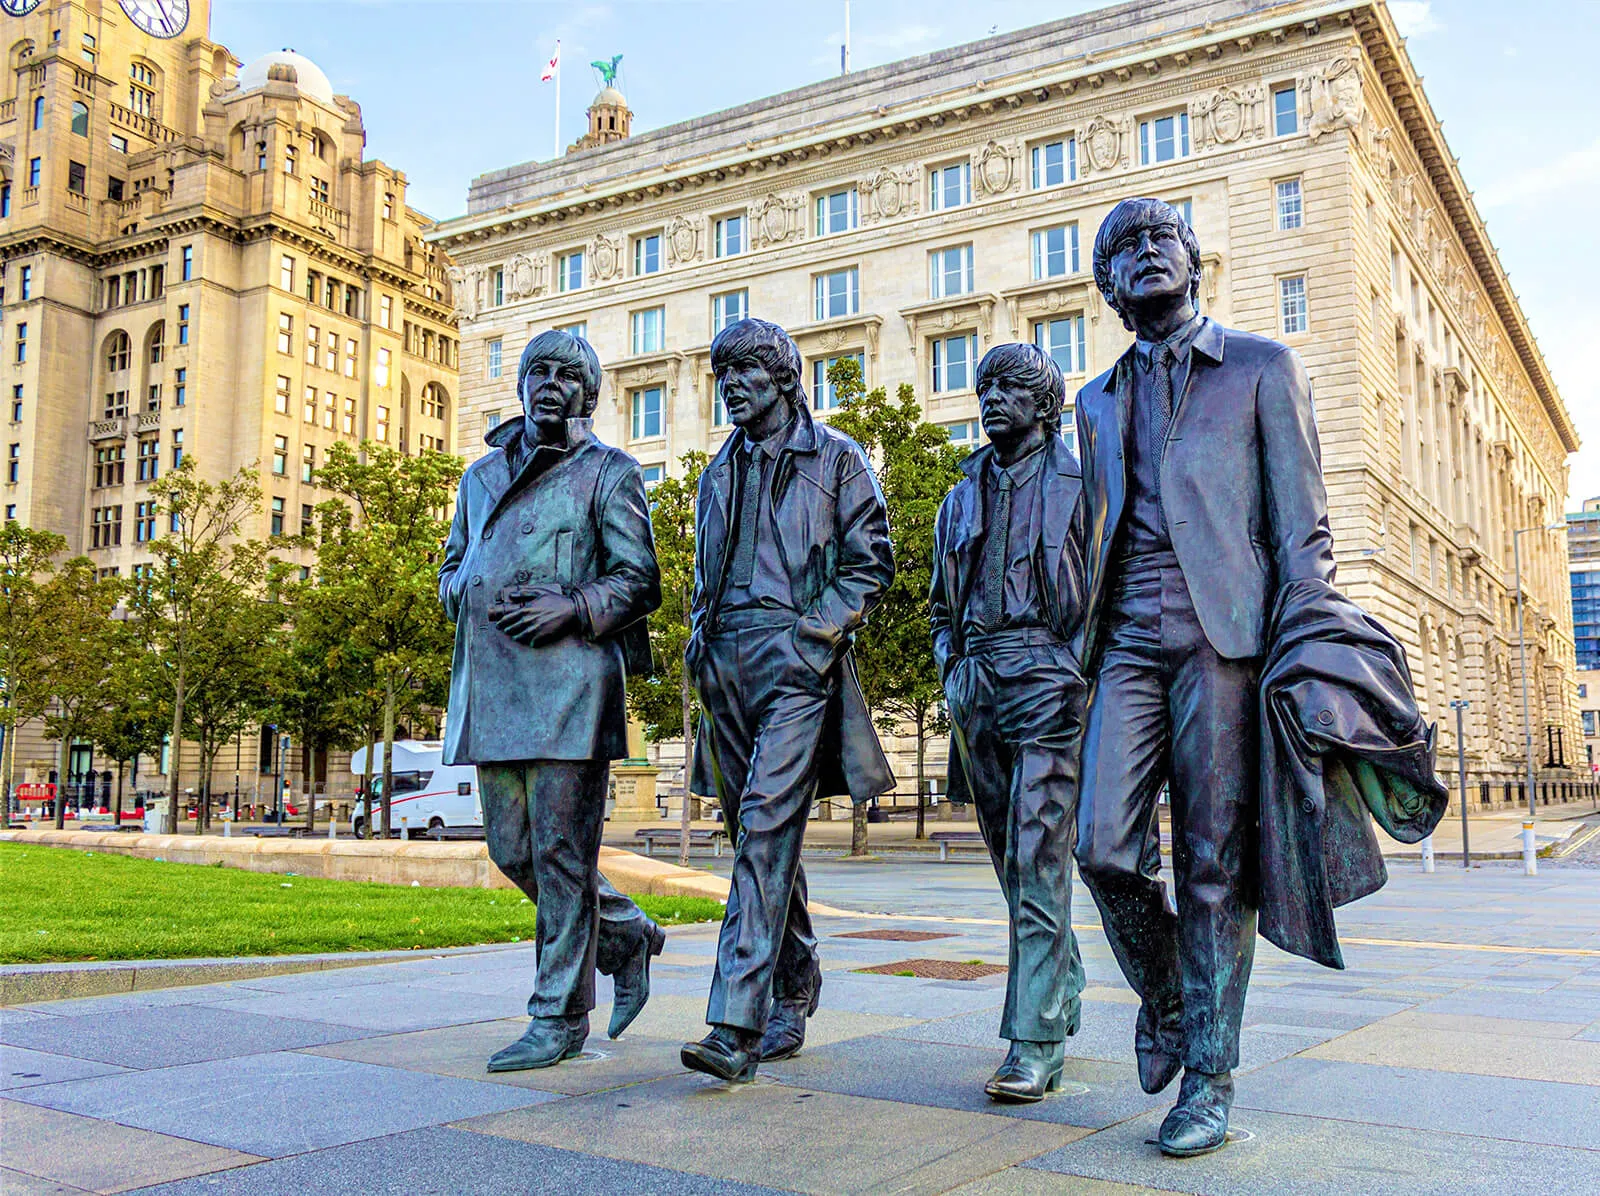 Statue of The Beatles